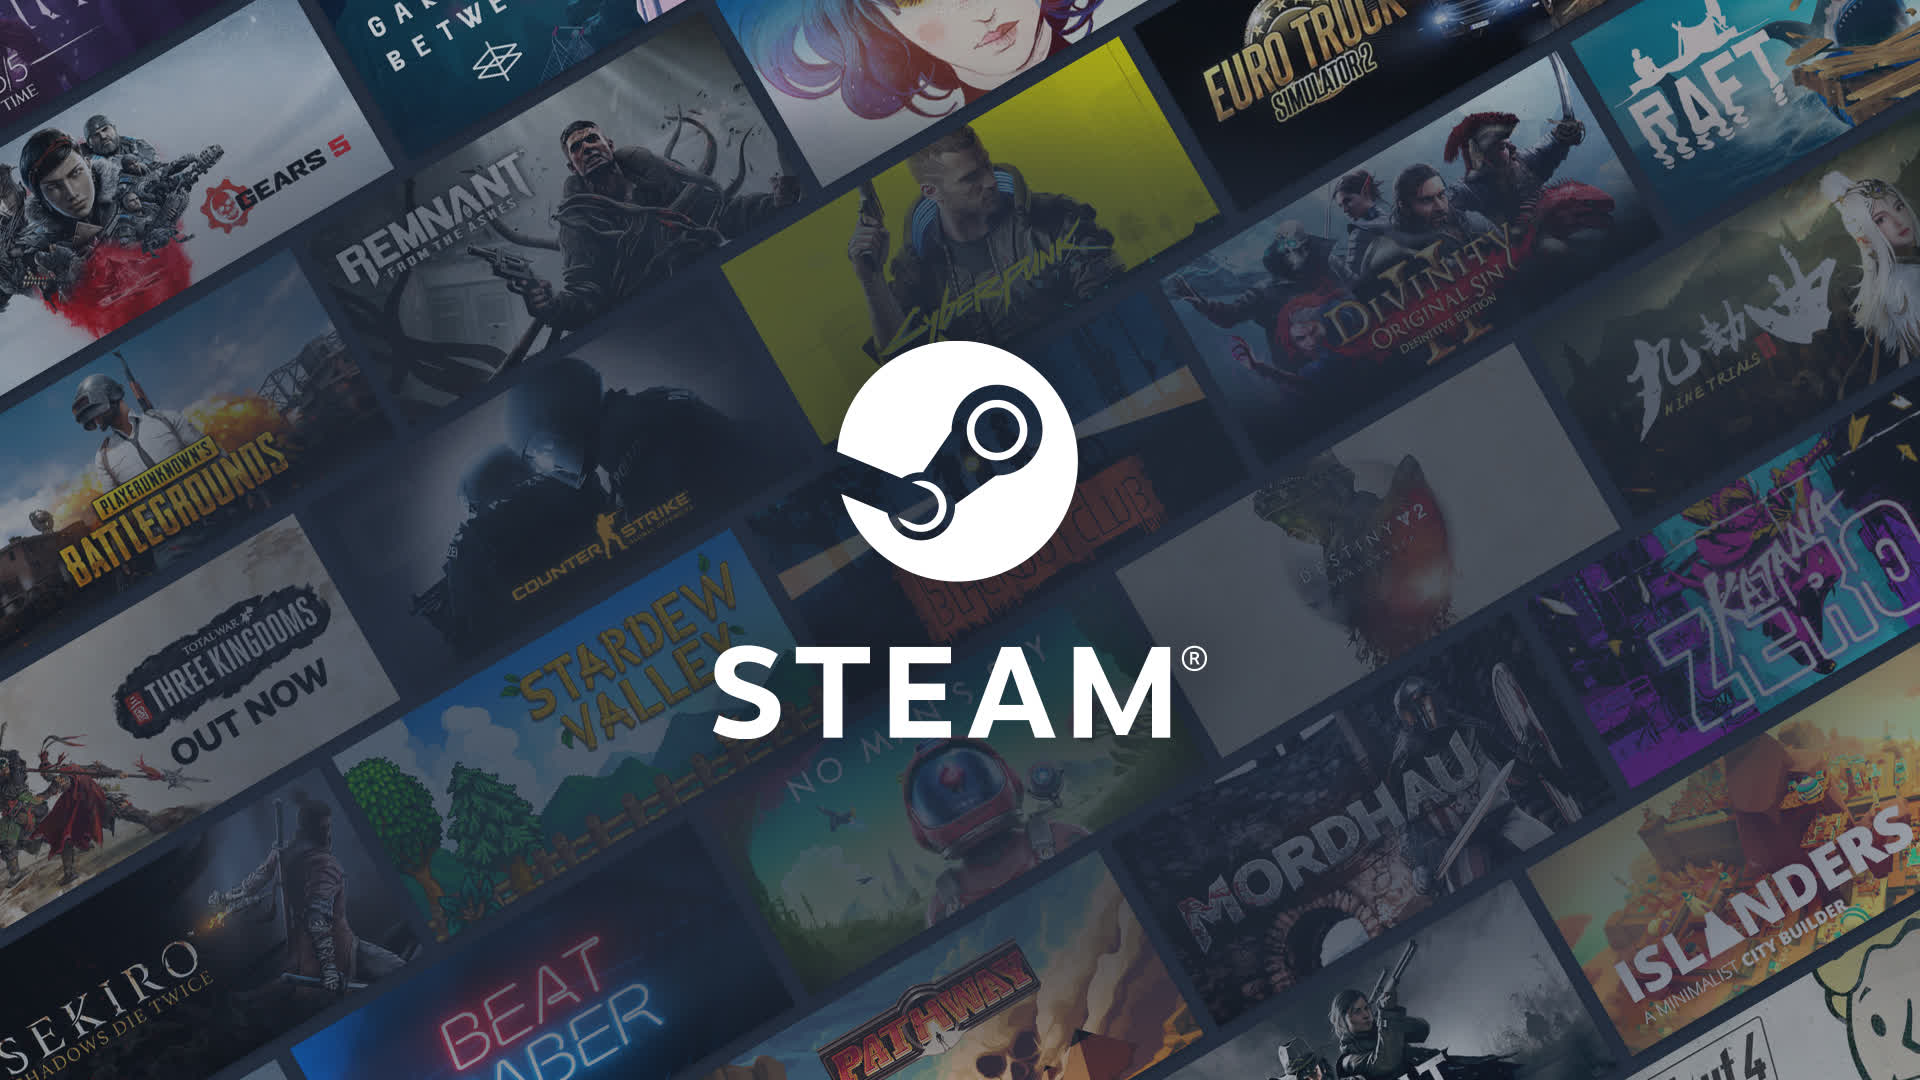 Valve is ending Steam support for Windows 7, 8, and 8.1